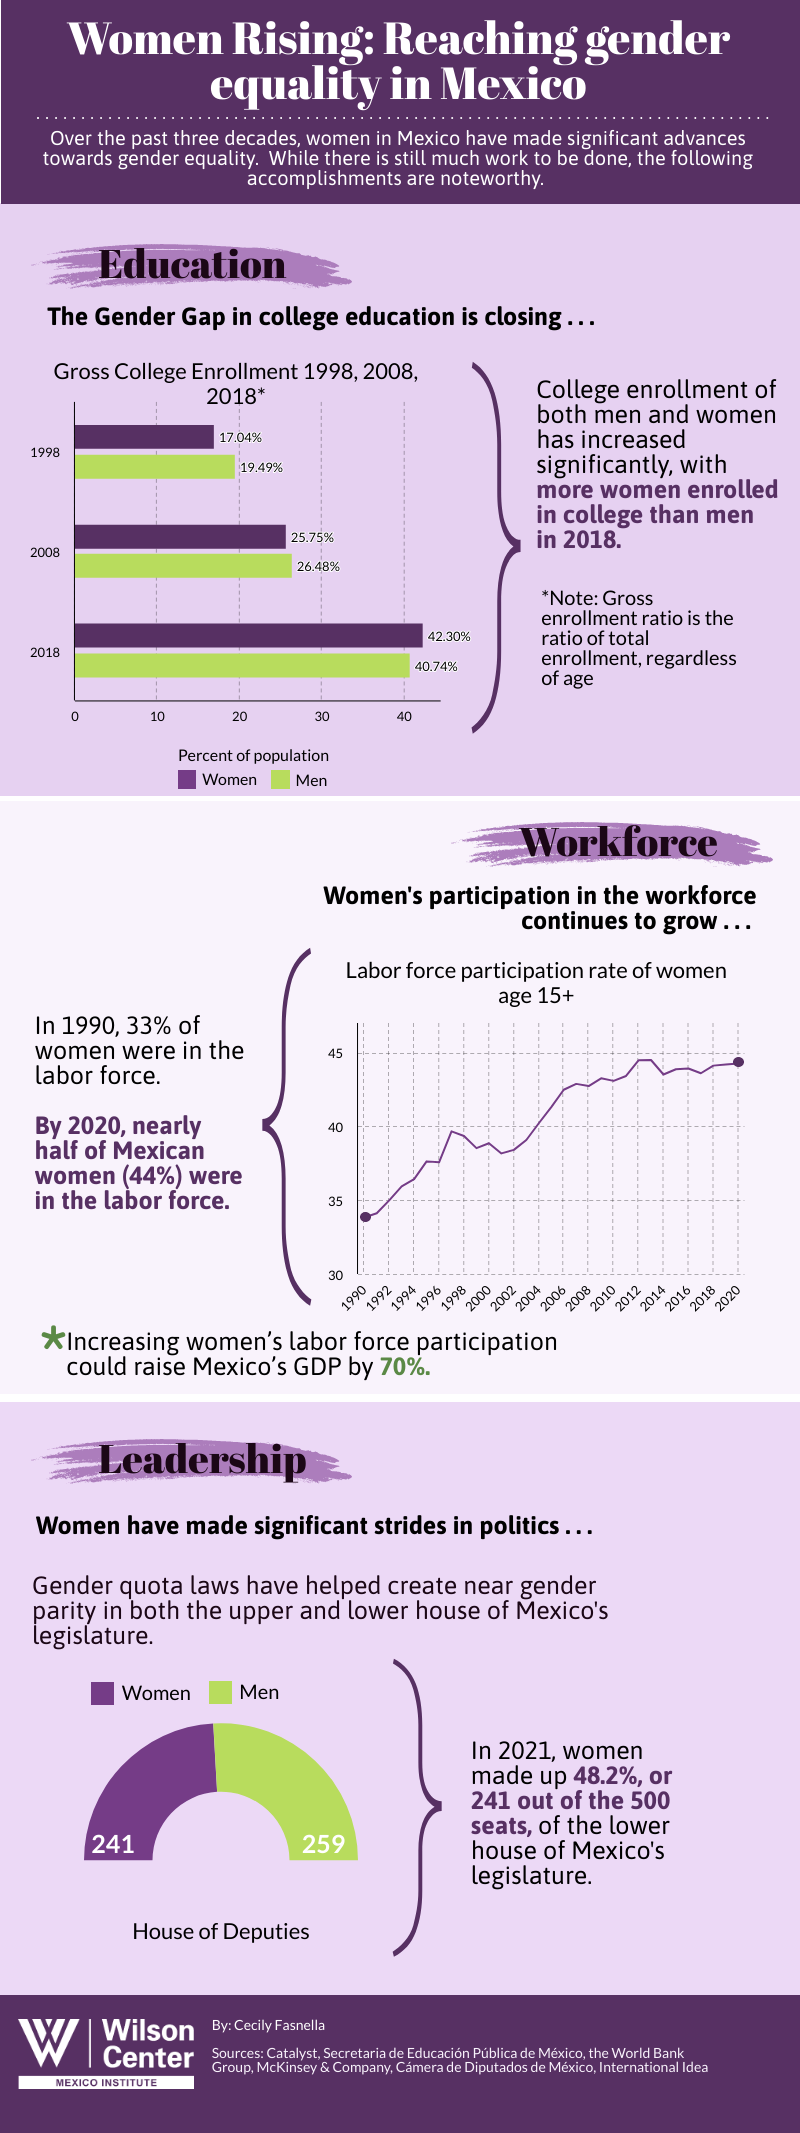 Wilson Center Infographic | Women rising: reaching gender equality in Mexico